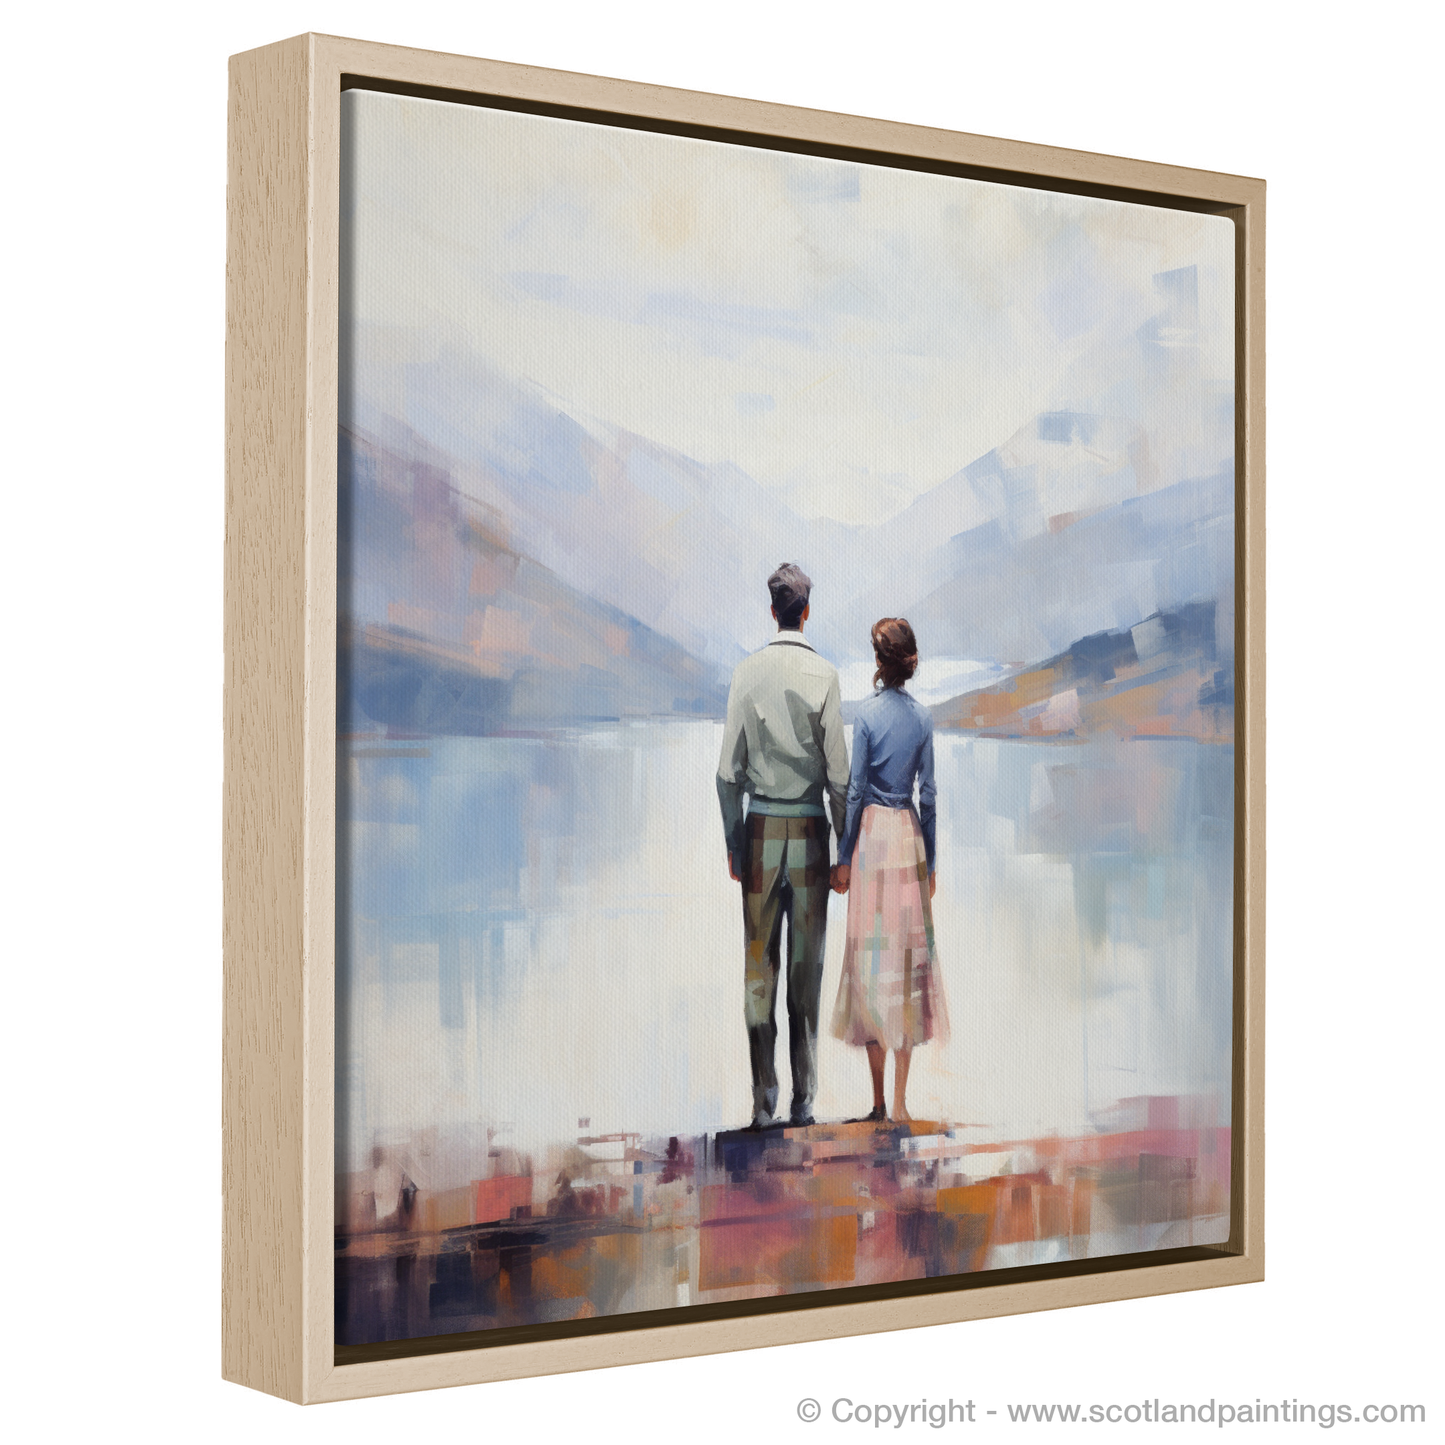 Painting and Art Print of A couple holding hands looking out on Loch Lomond entitled "Embracing Serenity at Loch Lomond".